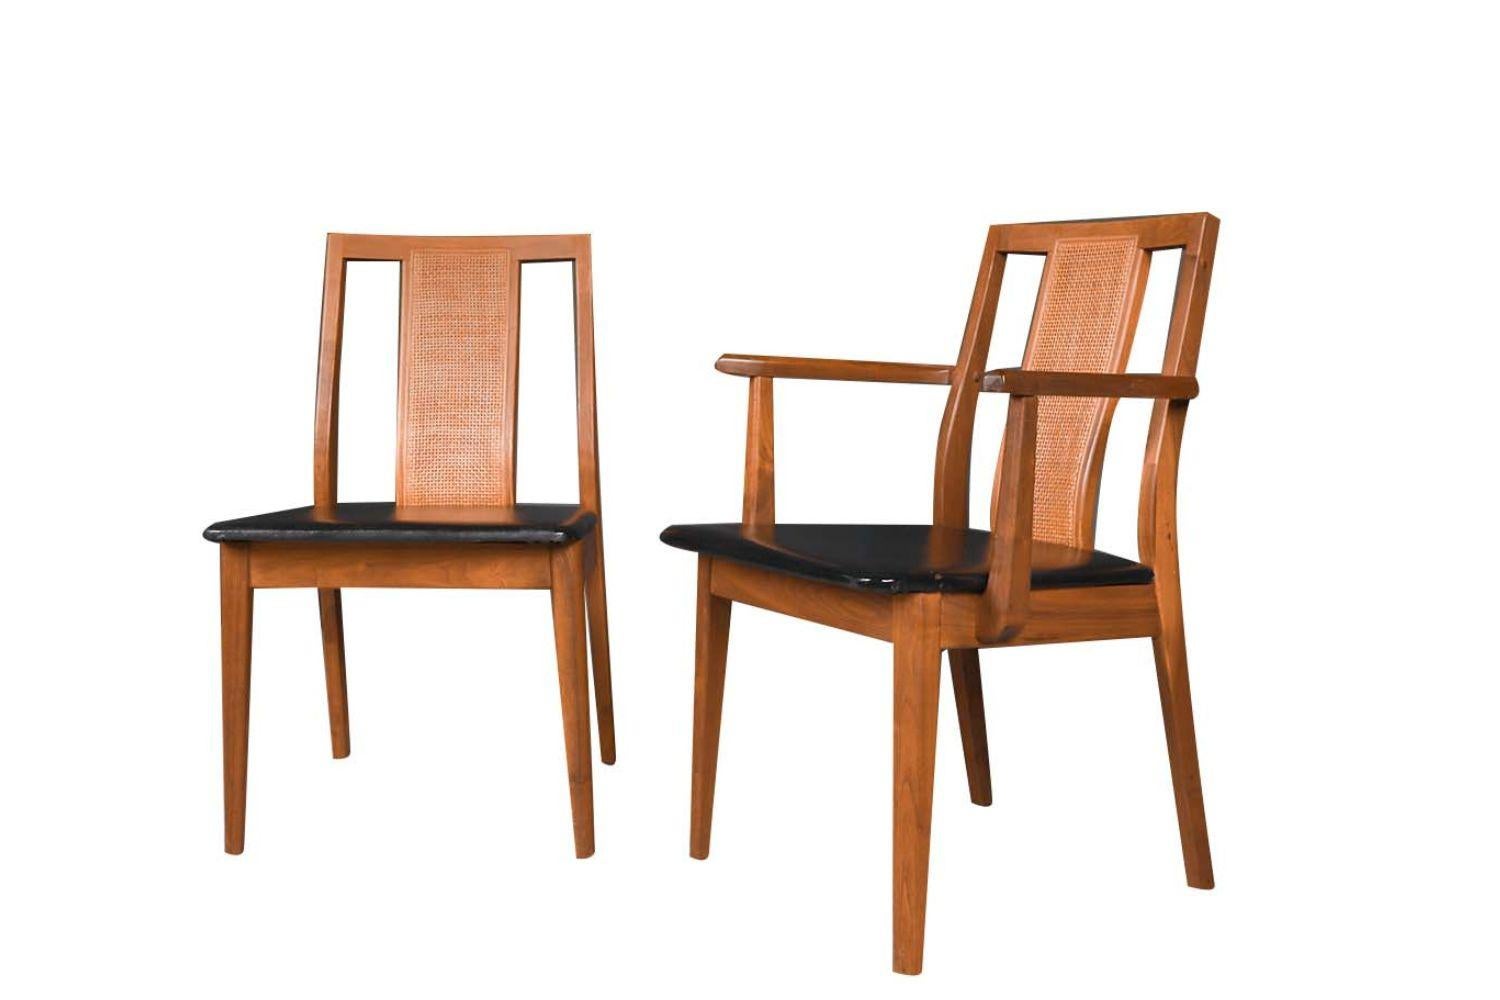 Four Midcentury Chairs in the Style of Edward Wormley 1